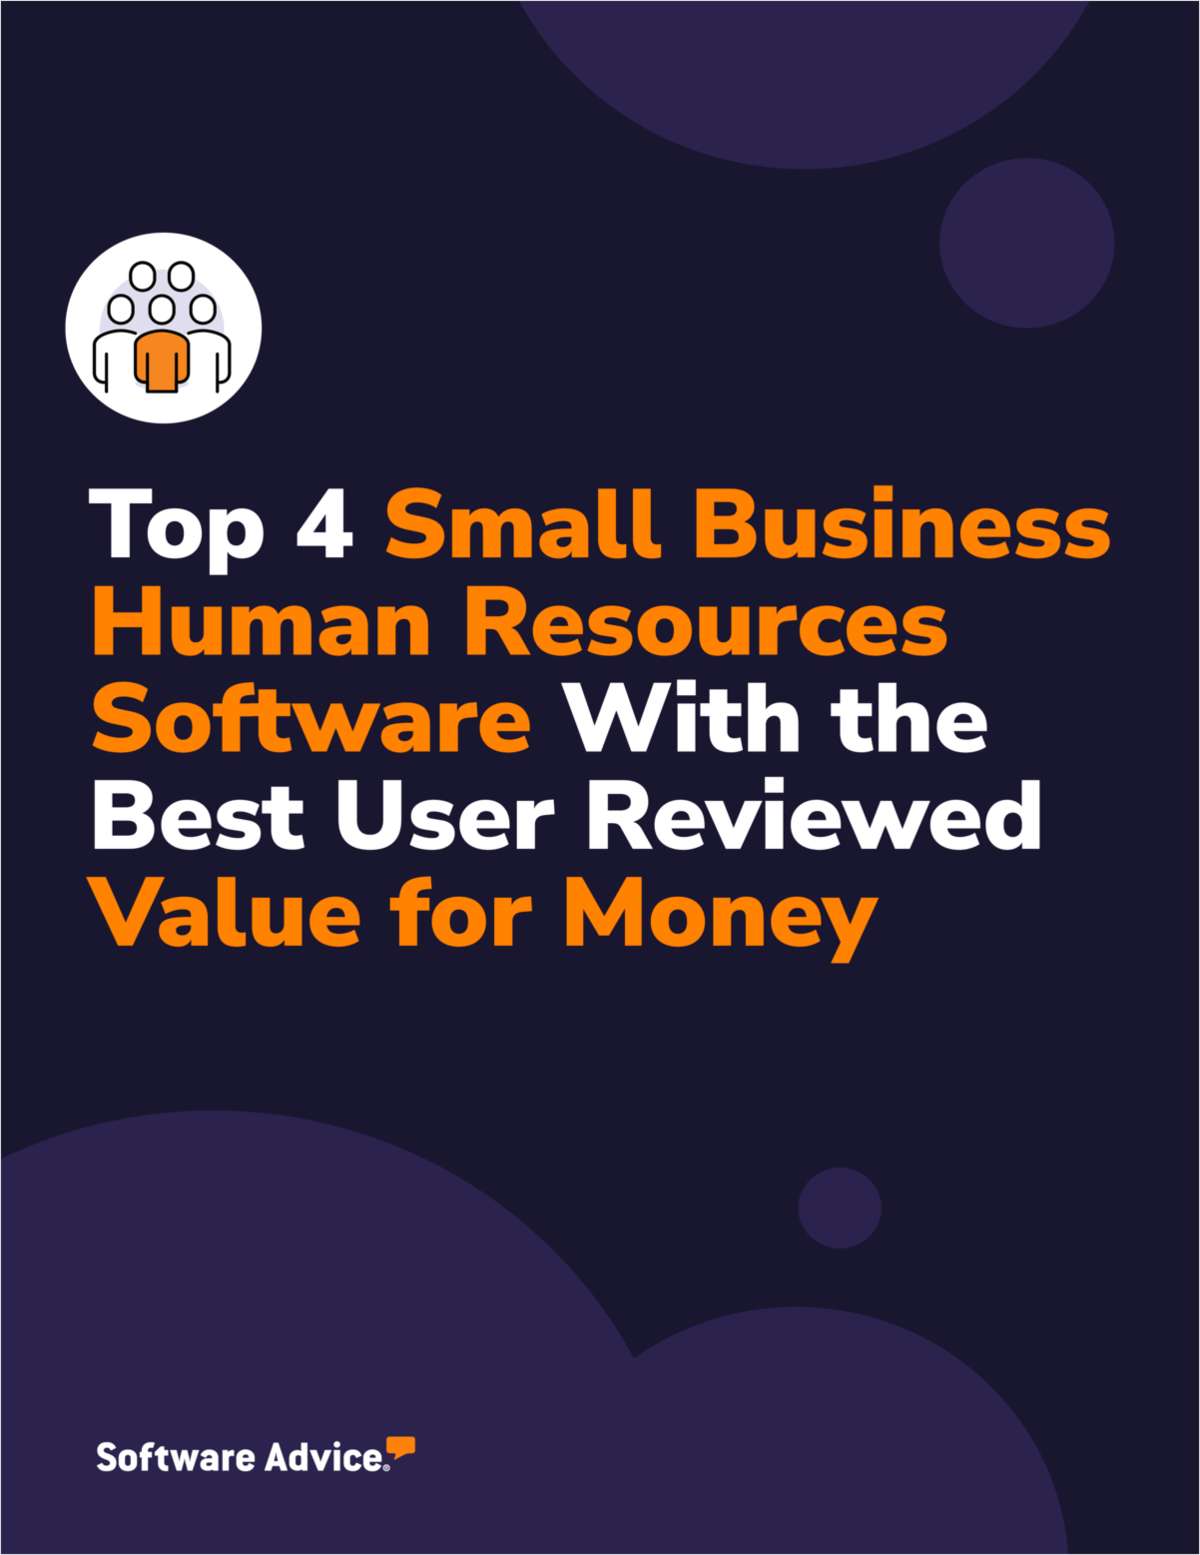 Top 4 Small Business Human Resources Software With the Best User Reviewed Value for Money